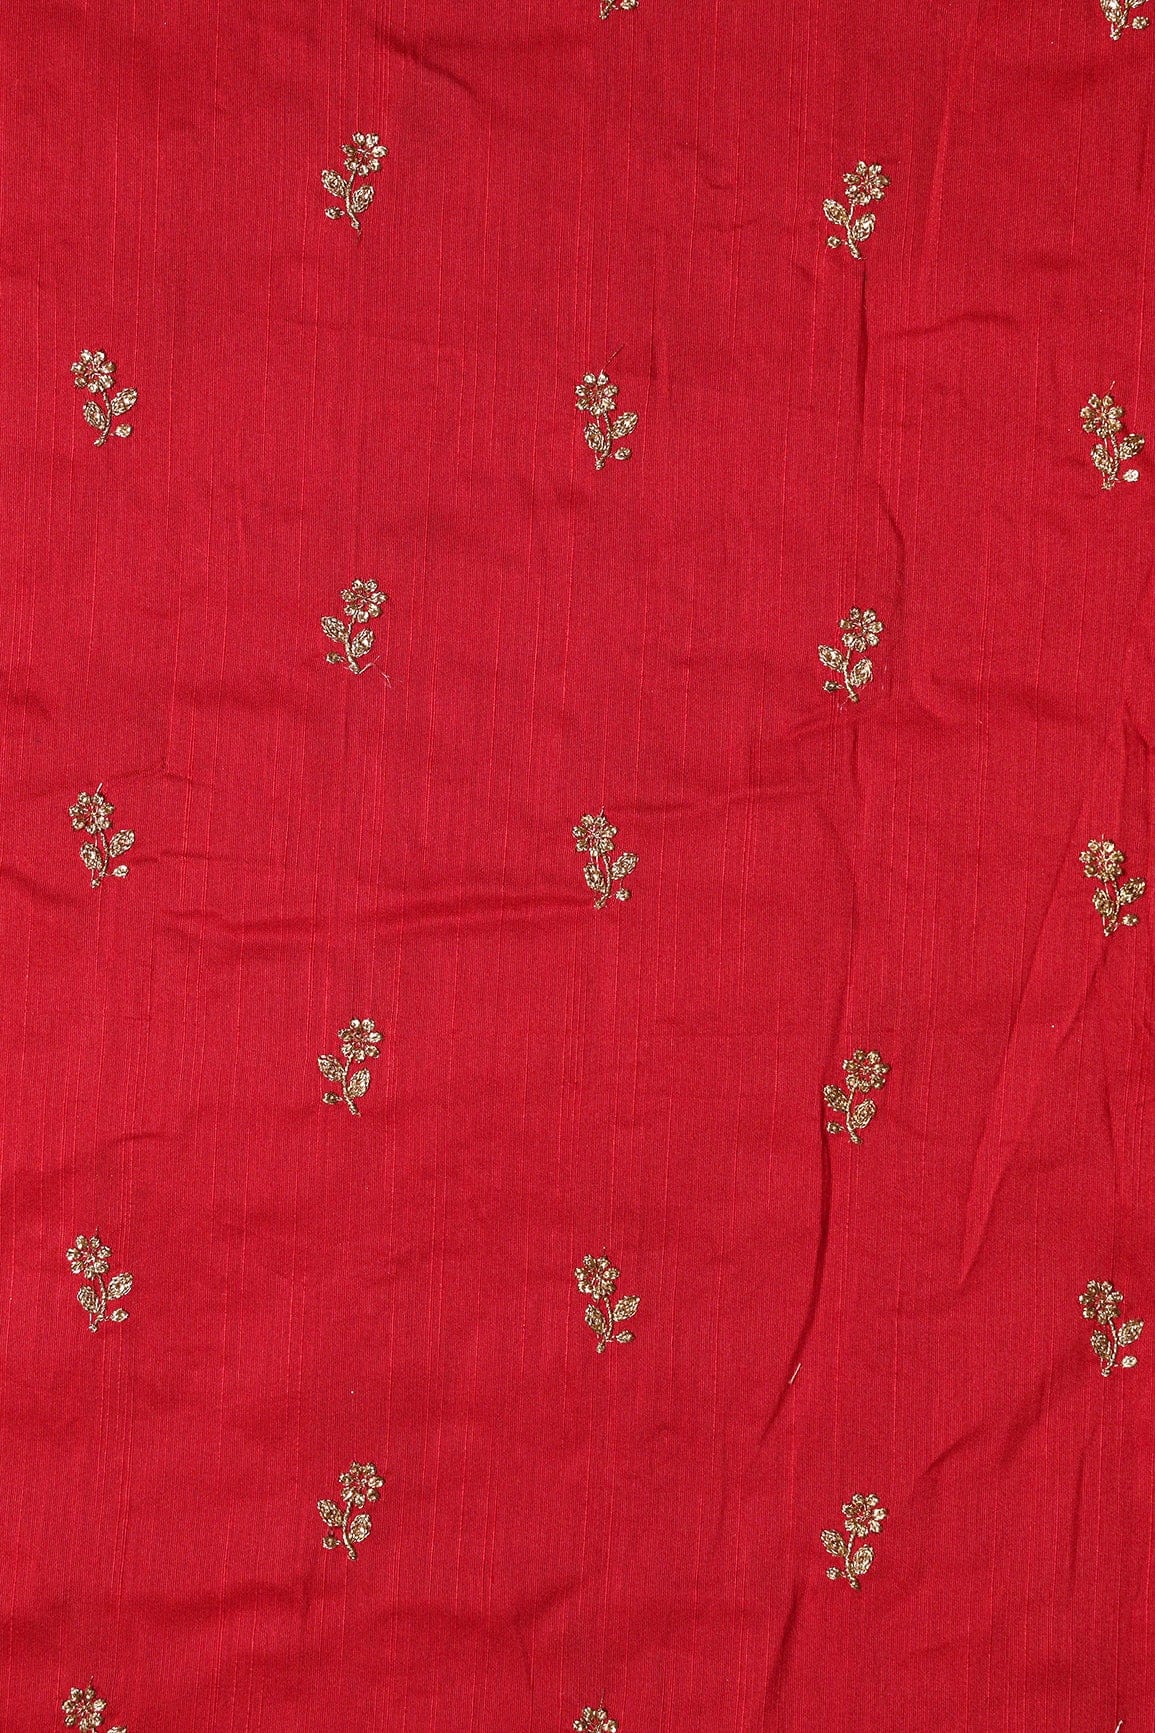 doeraa Embroidery Fabrics Gold Sequins With Gold Zari Small Floral Motif Embroidery Work On Red Raw Silk Fabric